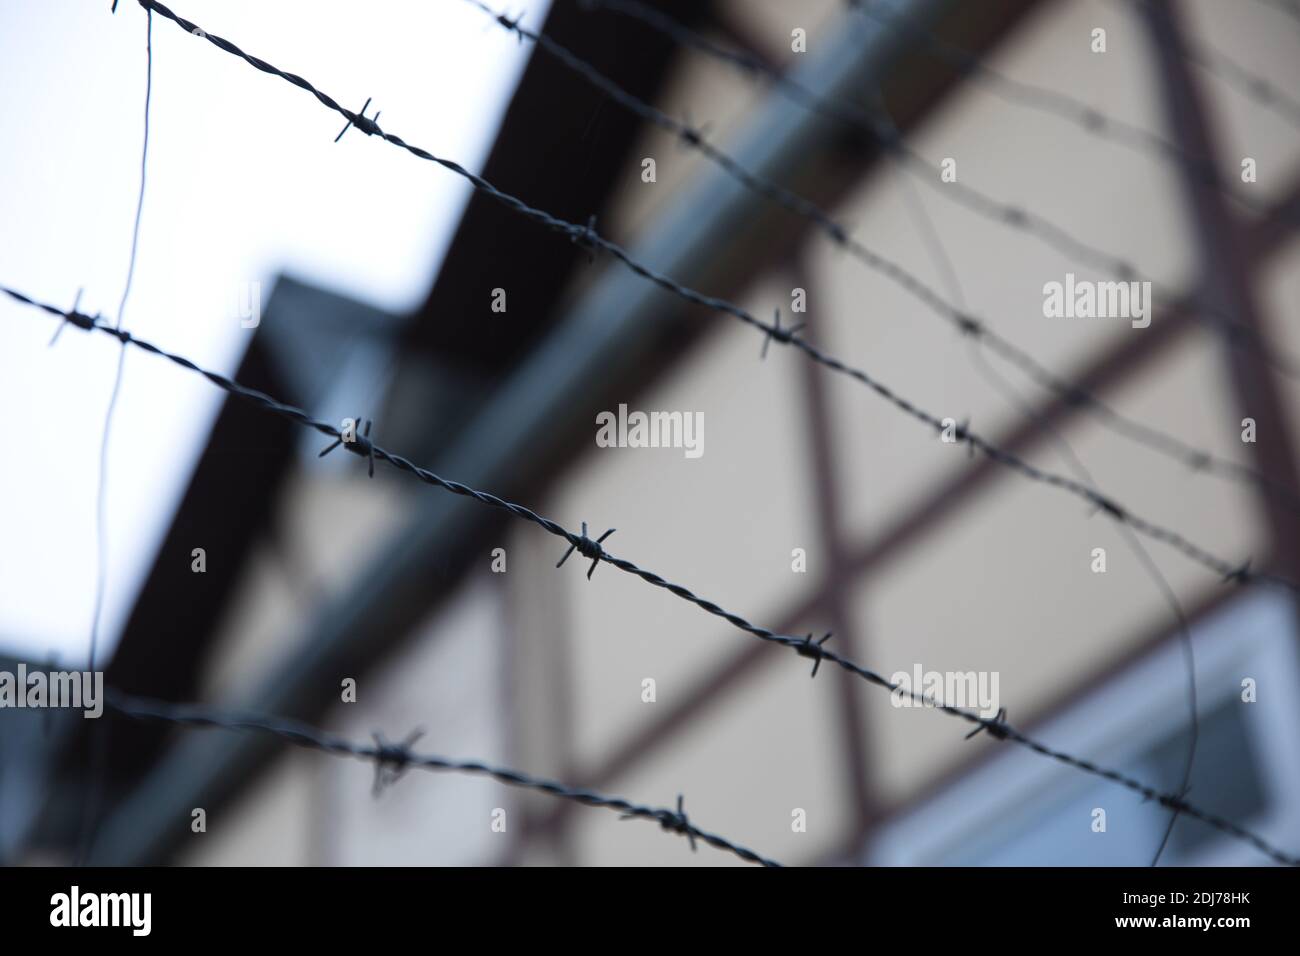 Barbed wire with house in background. Shallow depth of field. Focus on foreground. Stock Photo